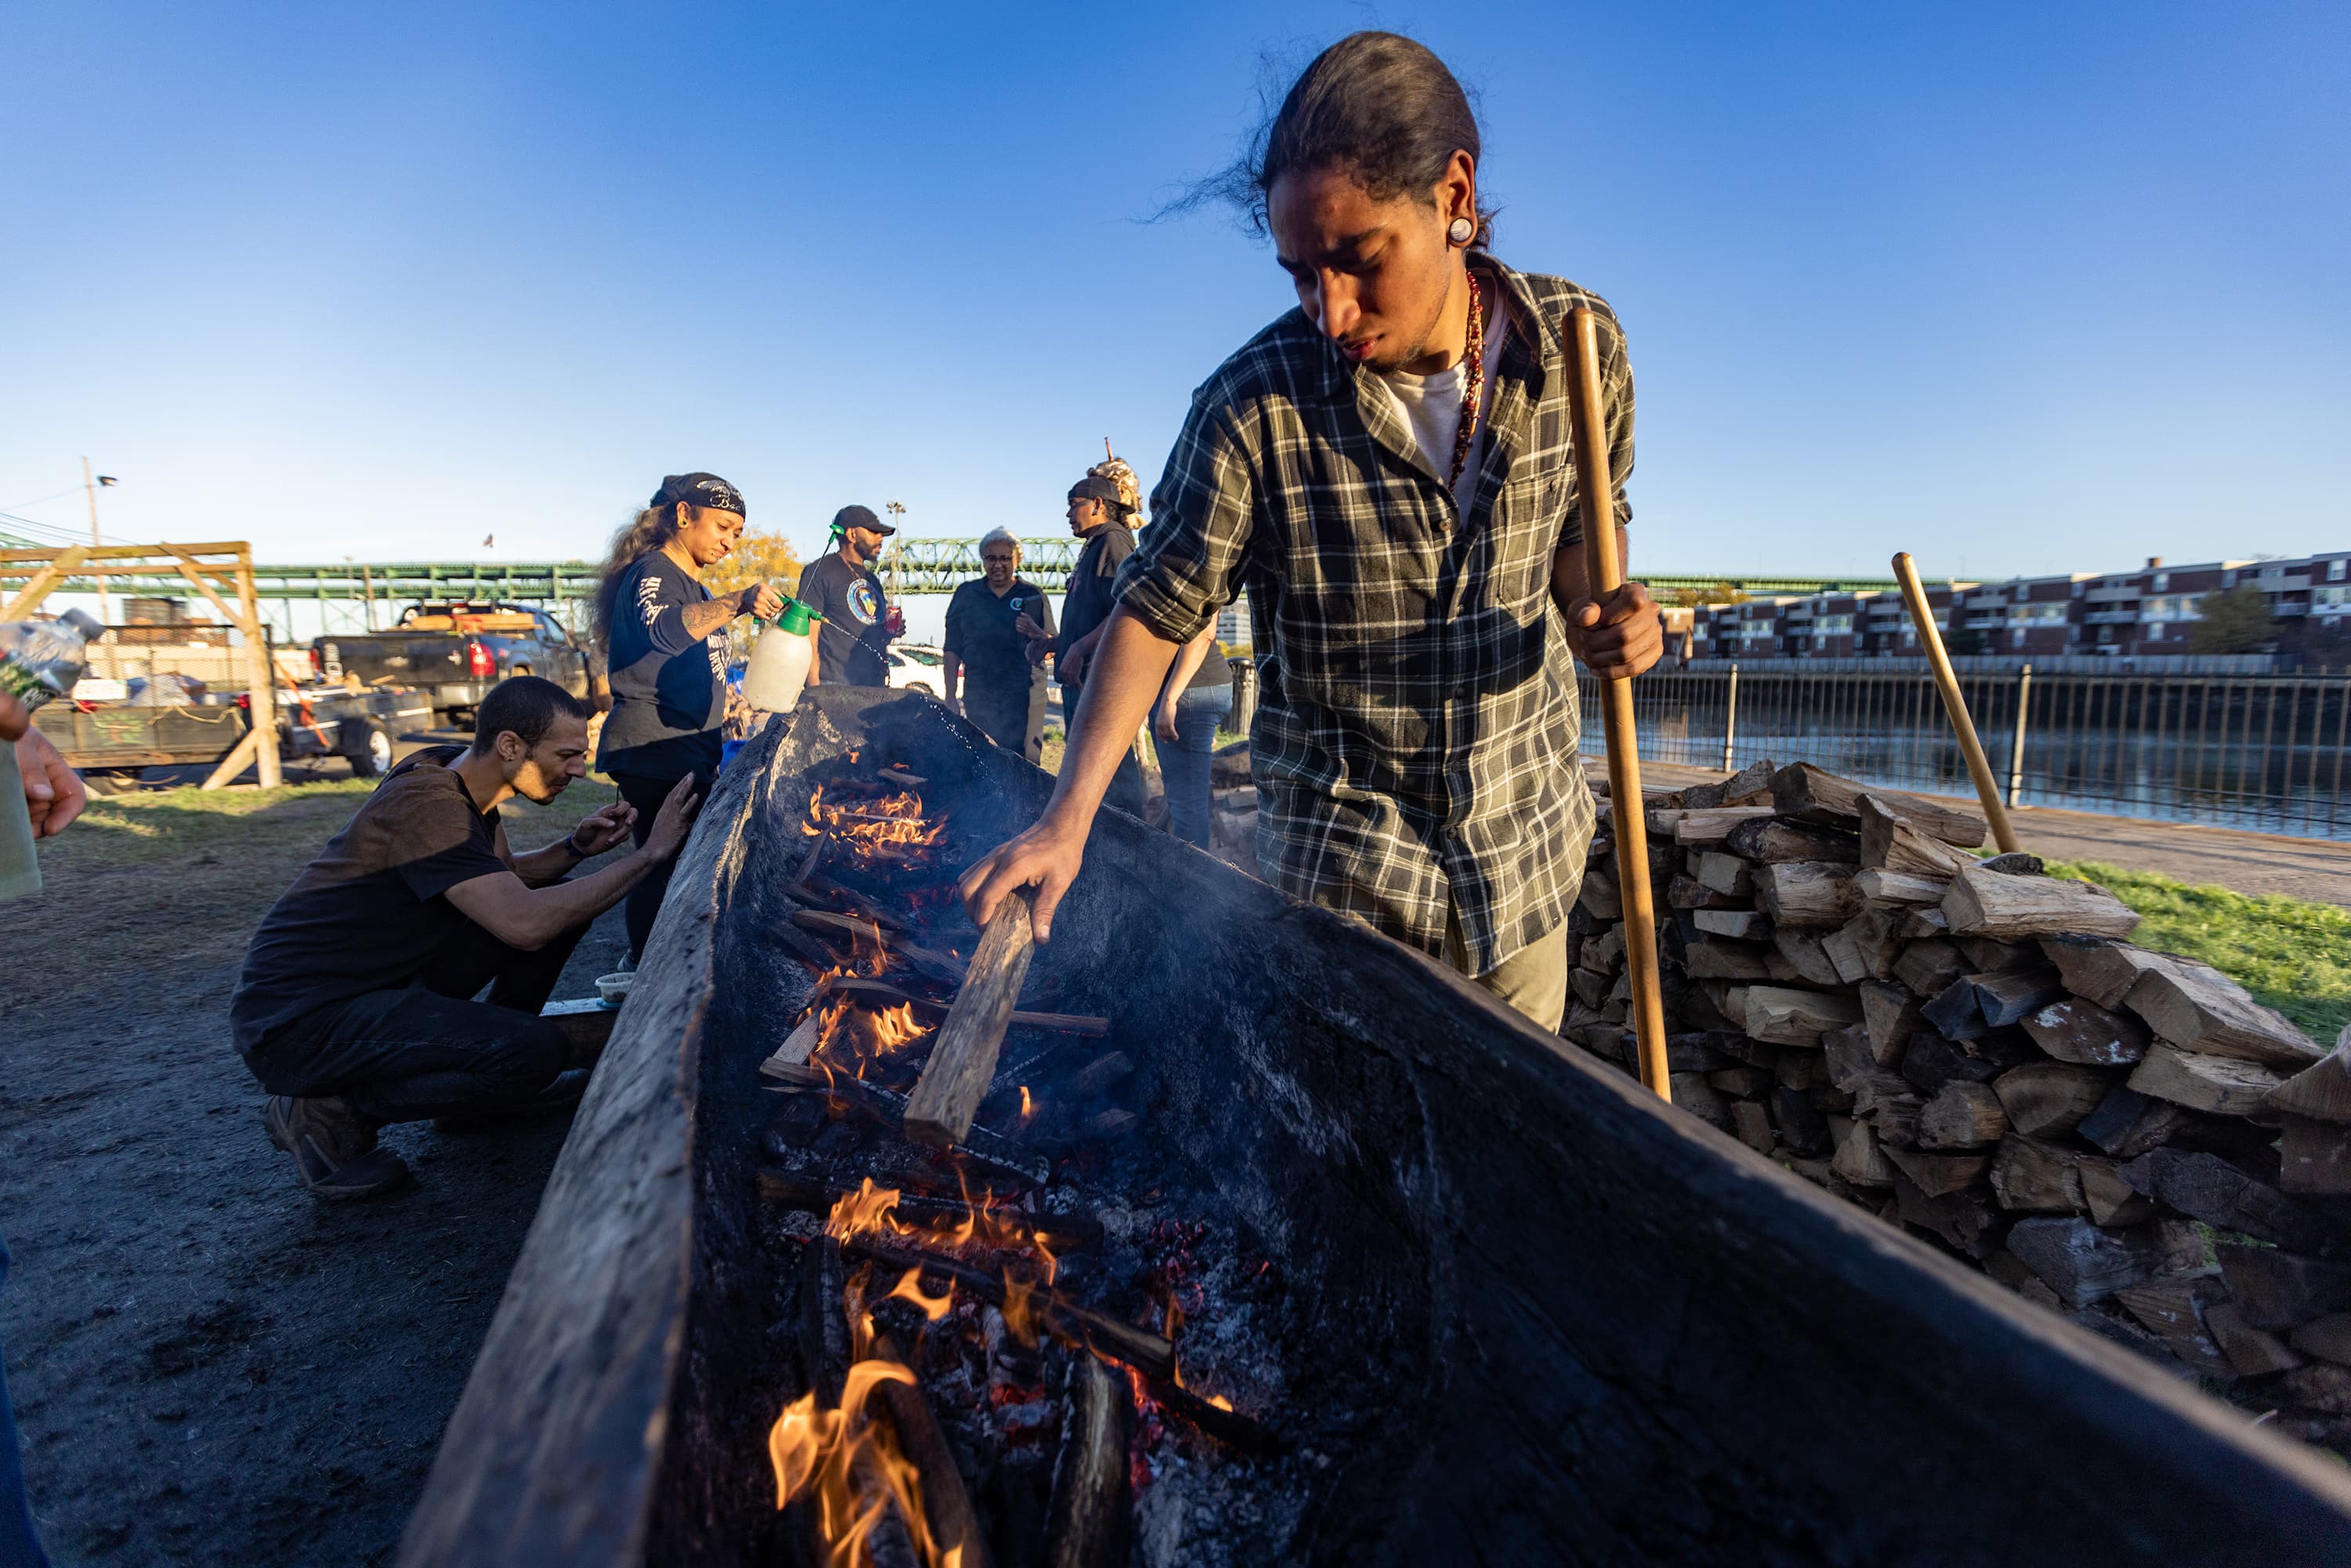 Daishuan Red Deer Garate, a cultural apprentice of the Nipmuc tribe, places wood pieces into the fire during the burning of a traditional mishoon at the Charlestown Little Mystic Boat Slip. (Jesse Costa/WBUR)